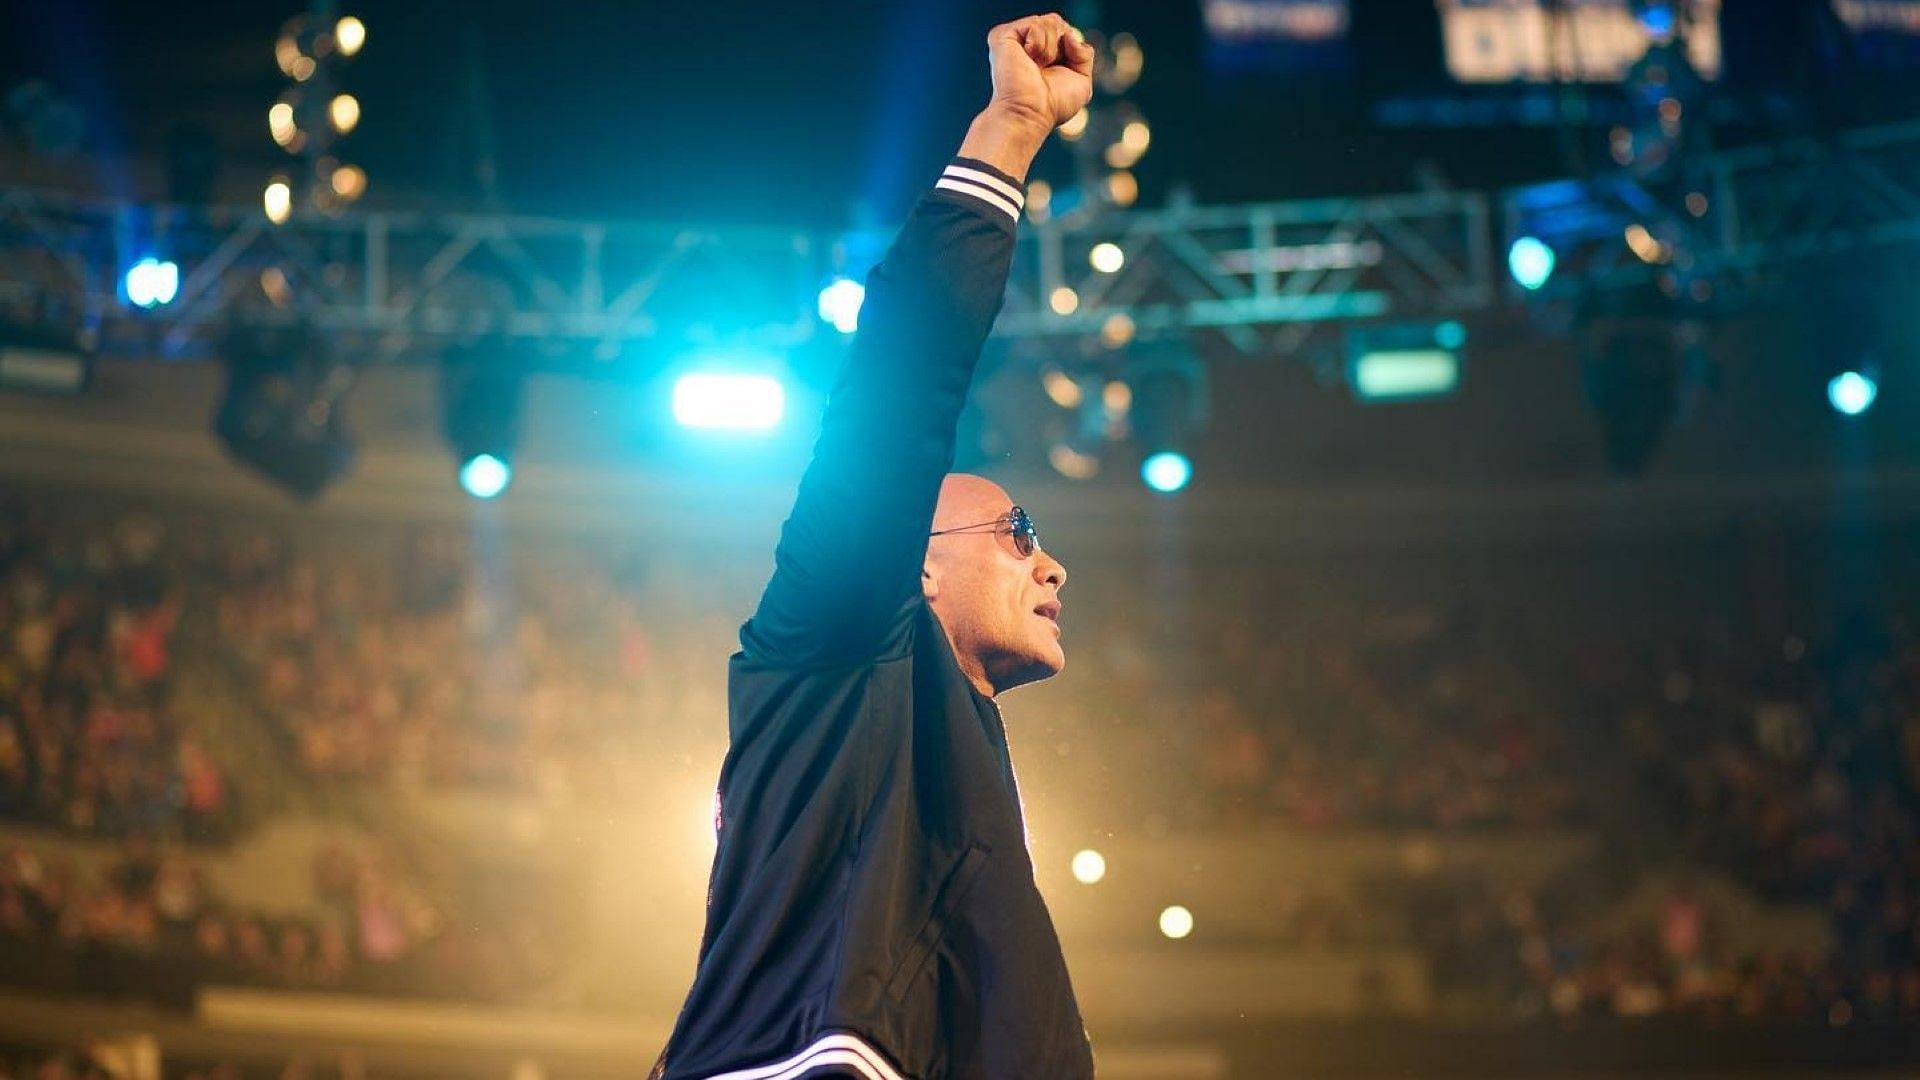 The Rock poses for fans on WWE SmackDown